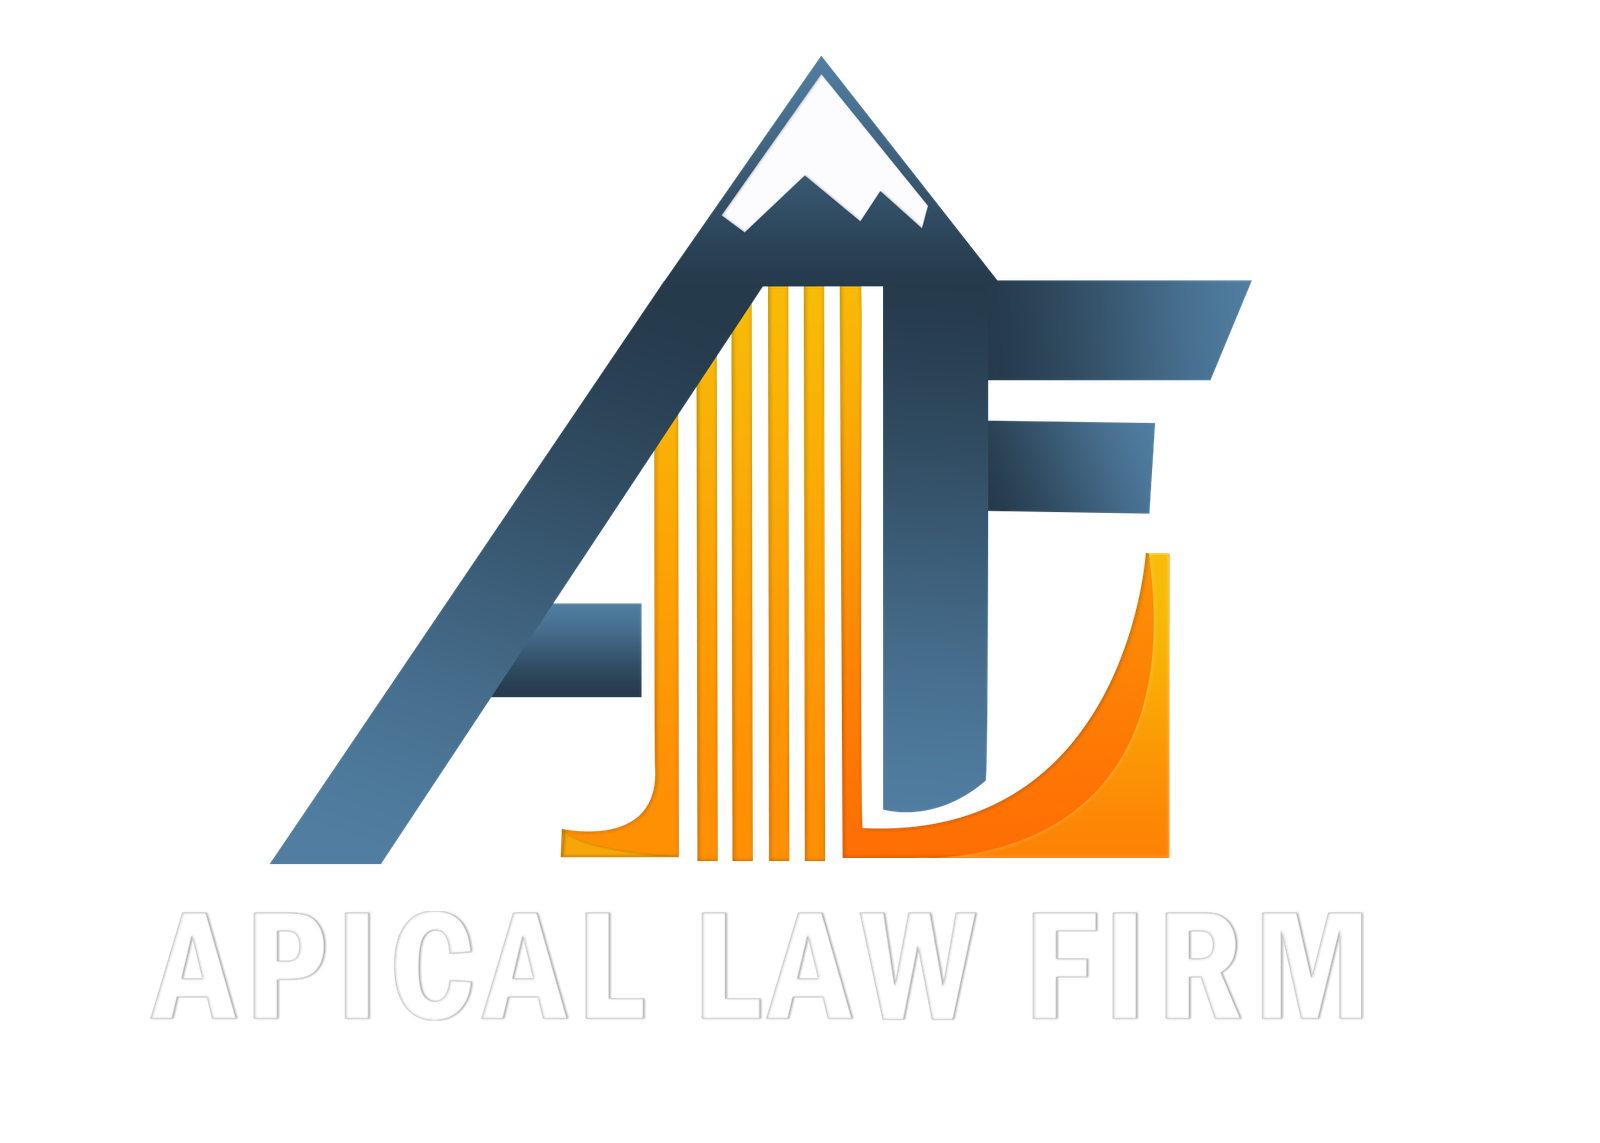 APICAL LAW FIRM